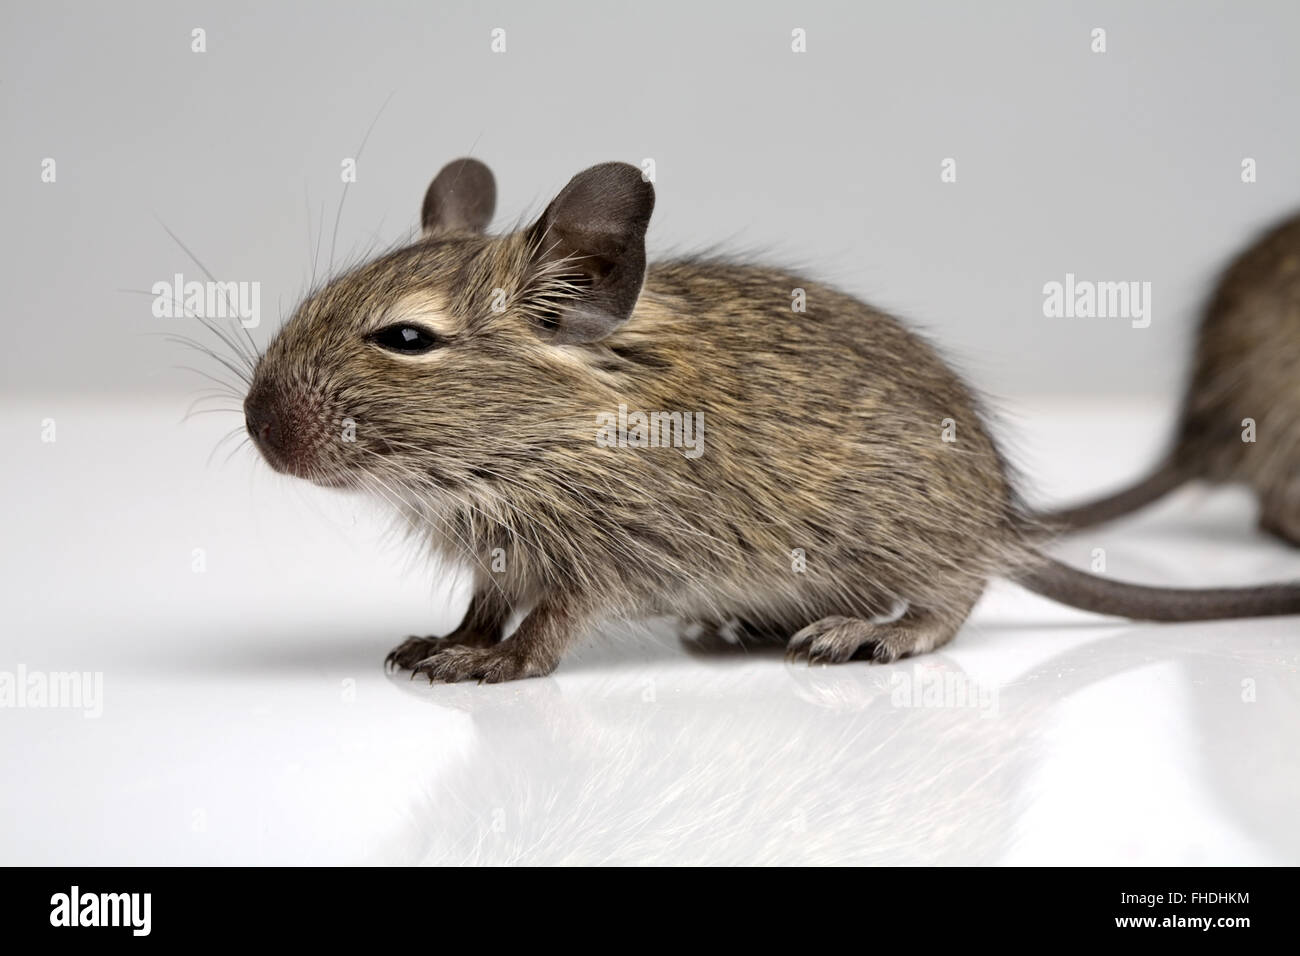 little baby degu mouse side full-sized closeup view on neutral background Stock Photo